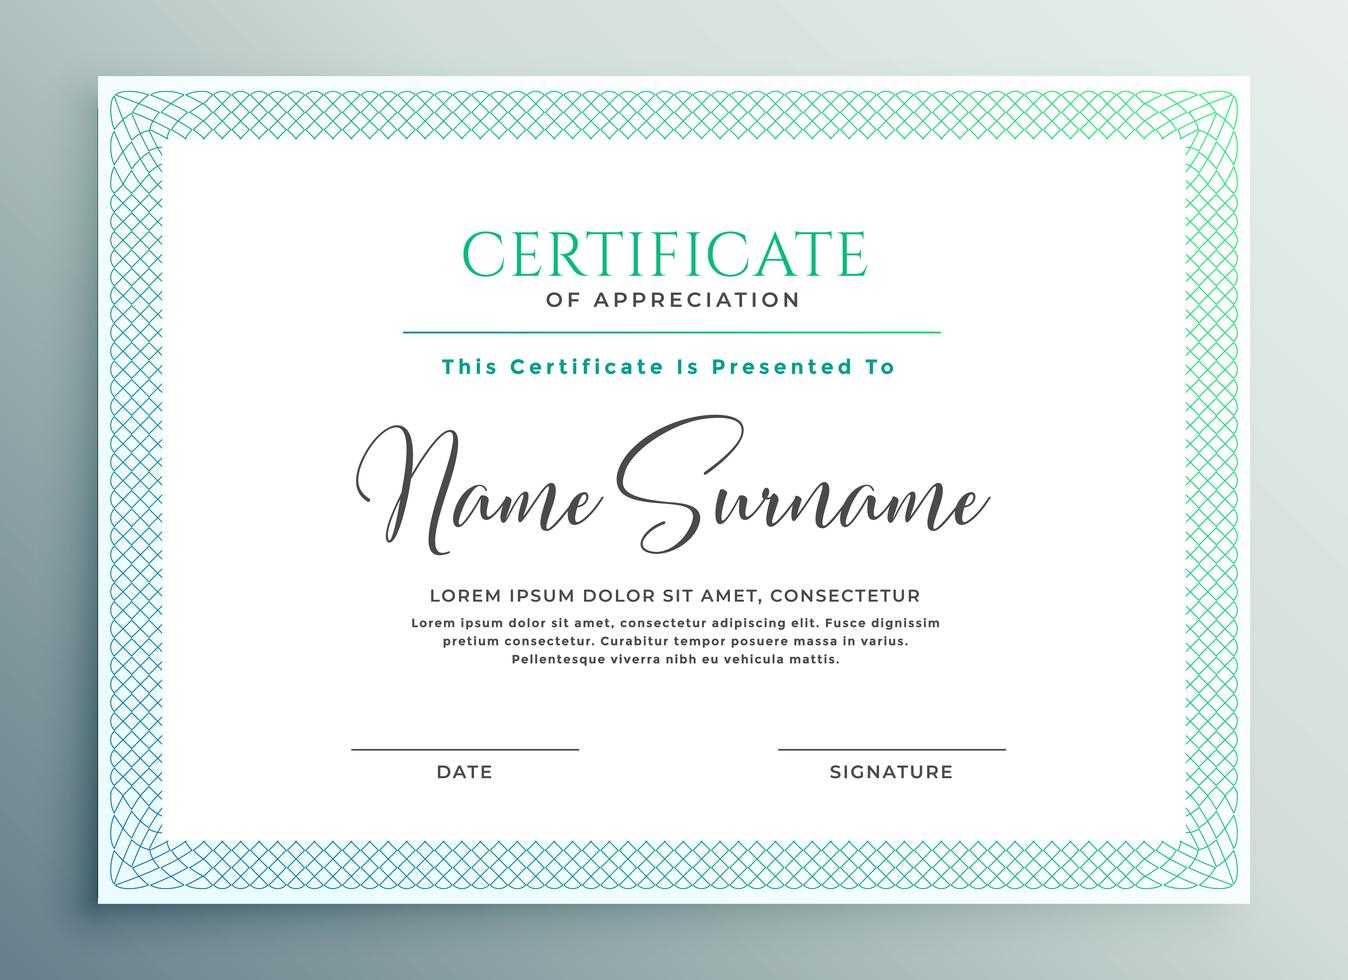 30+ Certificate Of Appreciation Download!! | Templates Study Throughout Gratitude Certificate Template